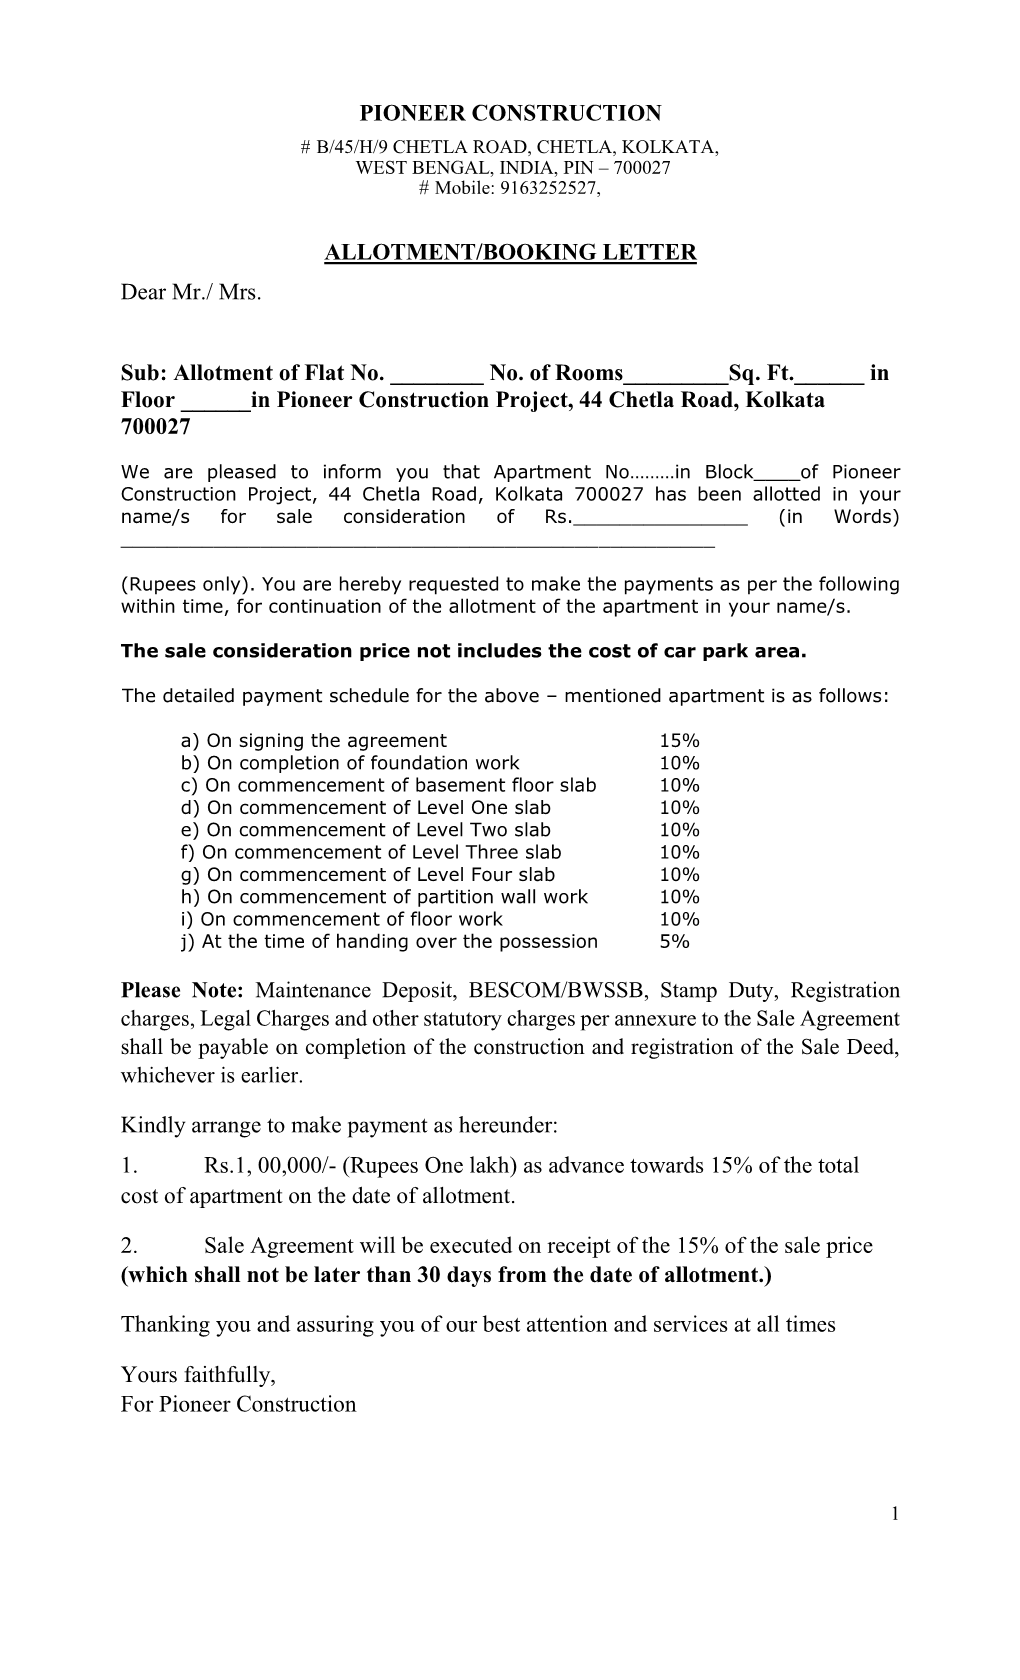 PIONEER CONSTRUCTION ALLOTMENT/BOOKING LETTER Dear Mr./ Mrs. Sub: Allotment of Flat No. ___No. of Rooms___Sq. Ft.___